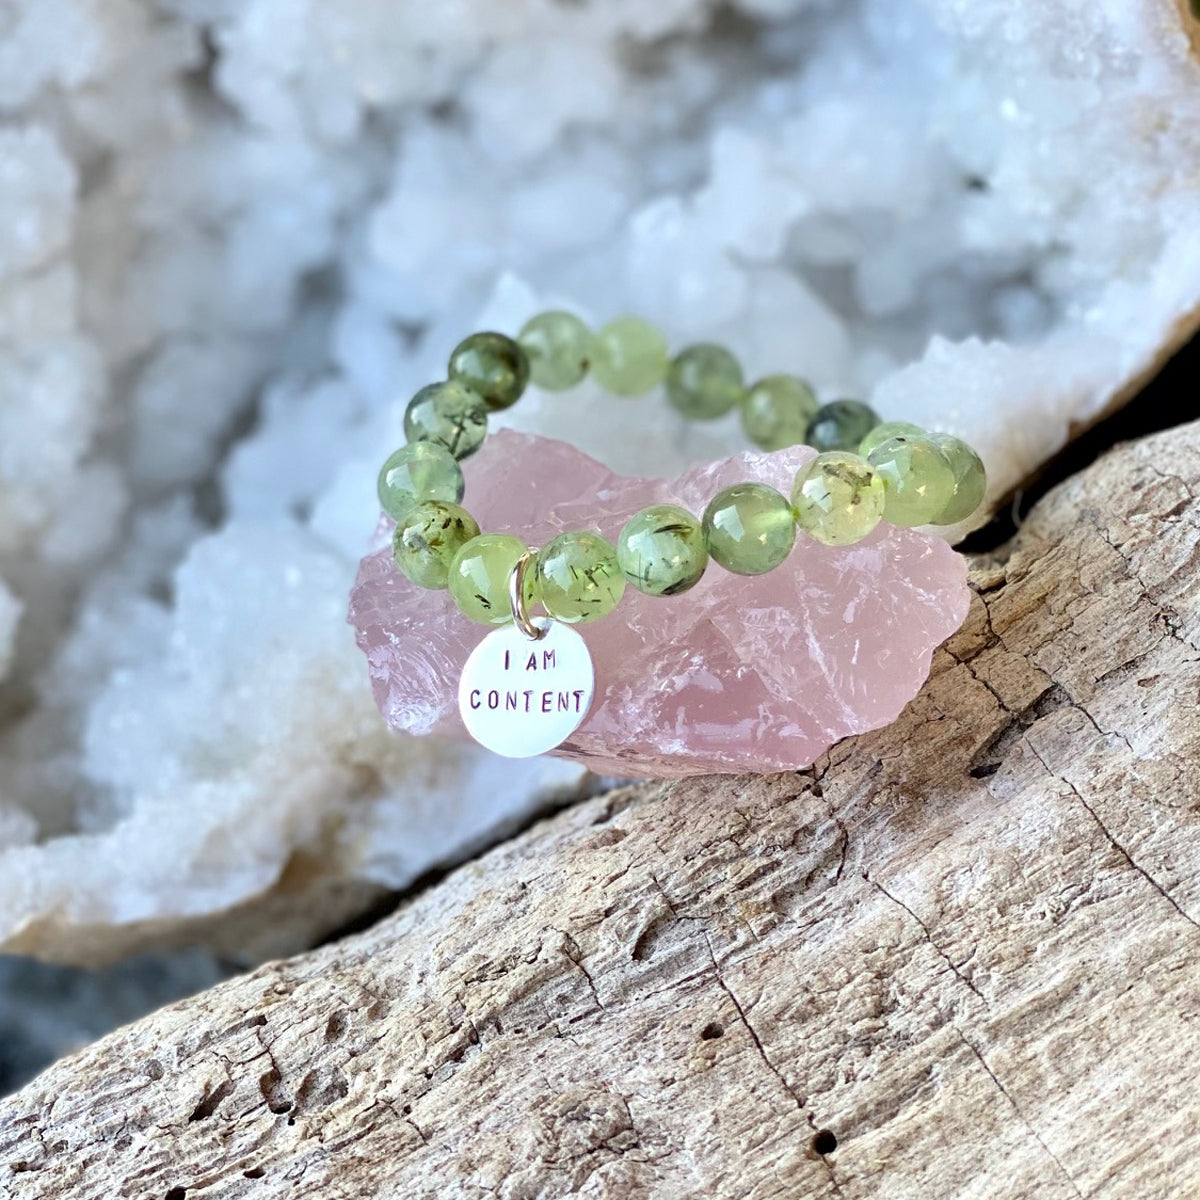 I am Content Affirmation Bracelet with Prehnite to Help Feel Happy